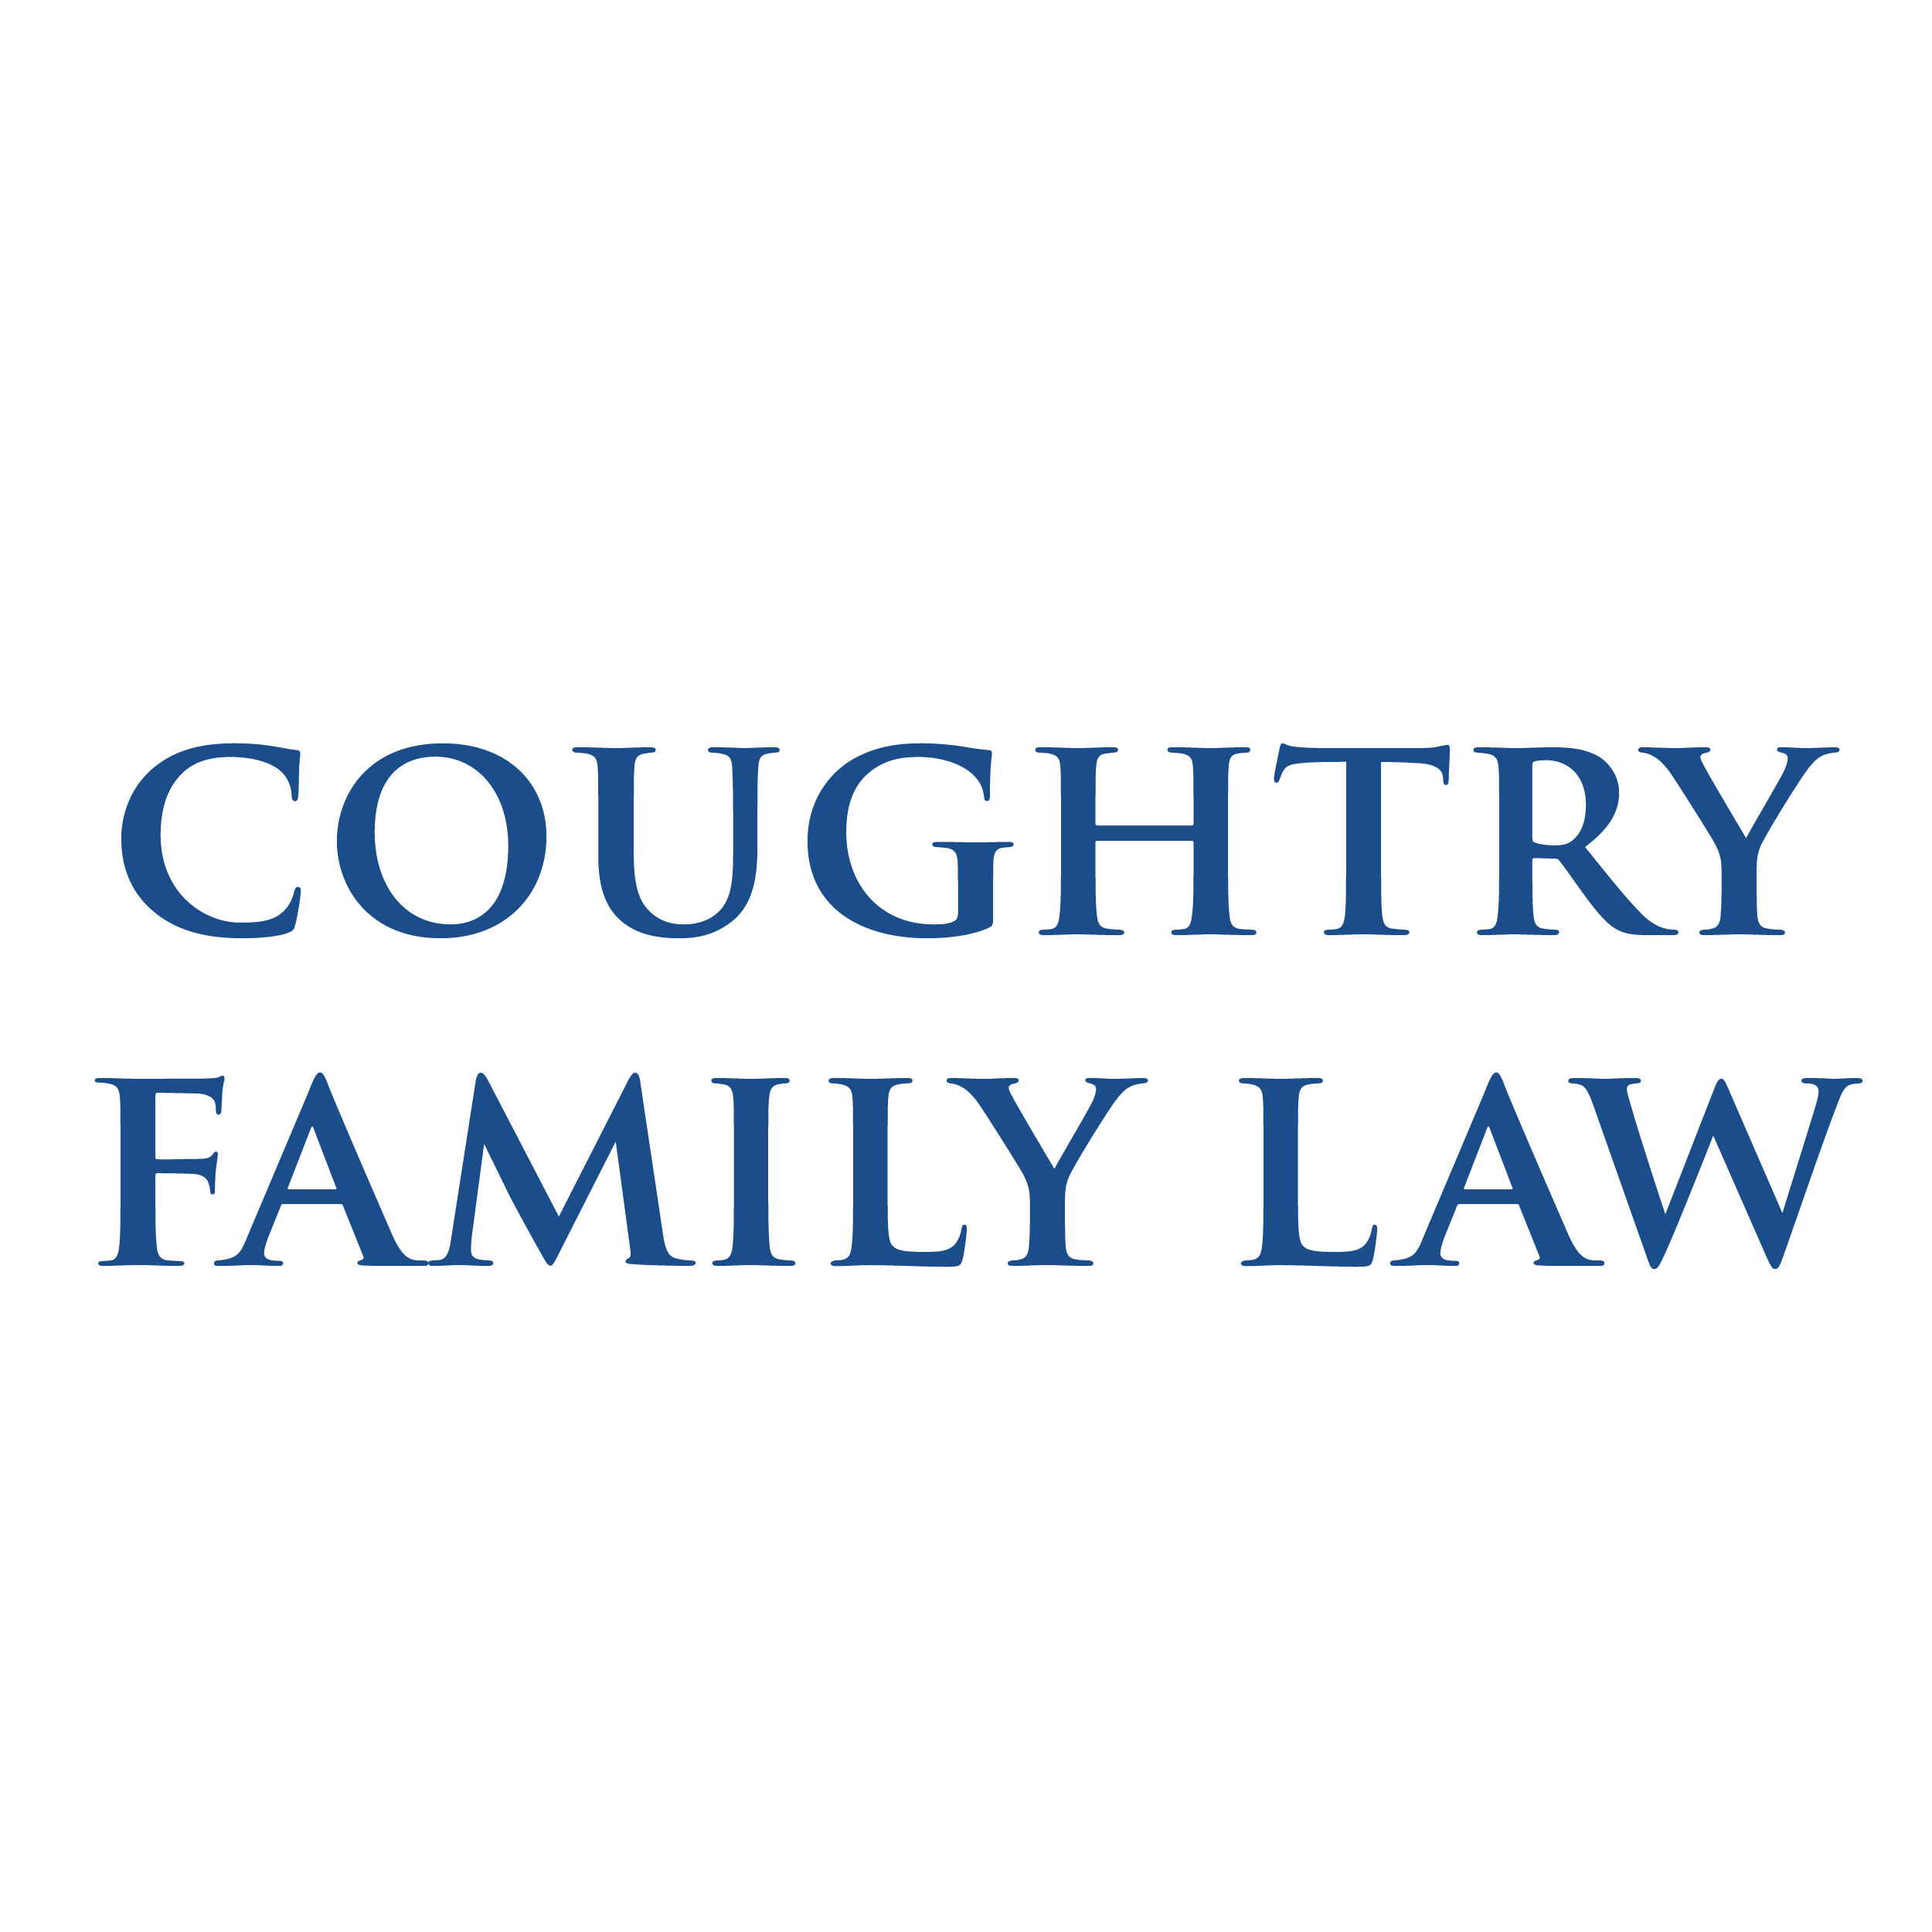 Coughtry Law Albany - Divorce Lawyer & Family Attorney - Albany, NY 12205 - (518)355-6268 | ShowMeLocal.com